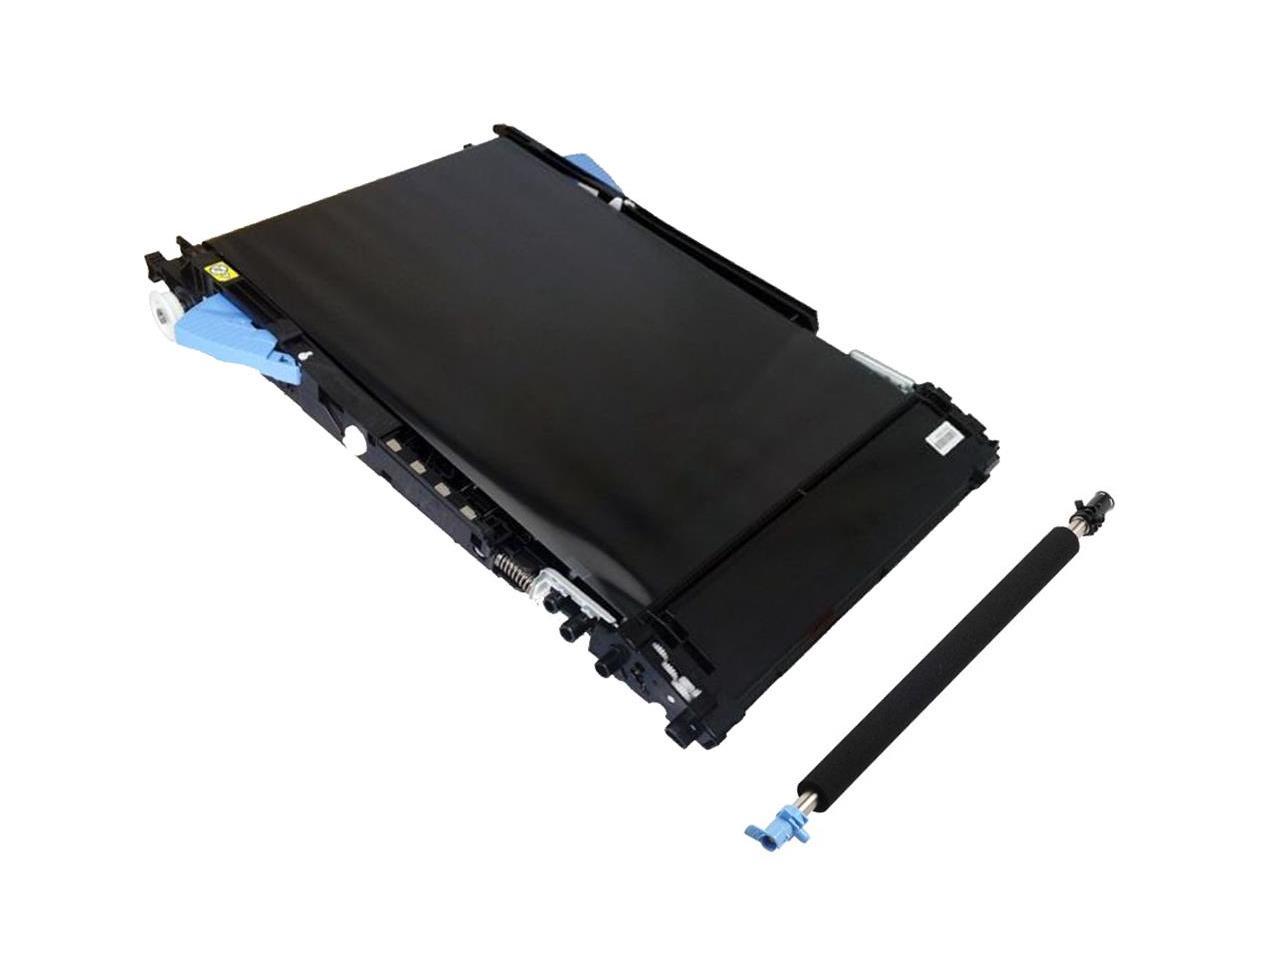 RM1-5575 Transfer Belt Assembly Compatible with HP Color LaserJet CP4025 CC493-67910 CP CE249A CP4525 